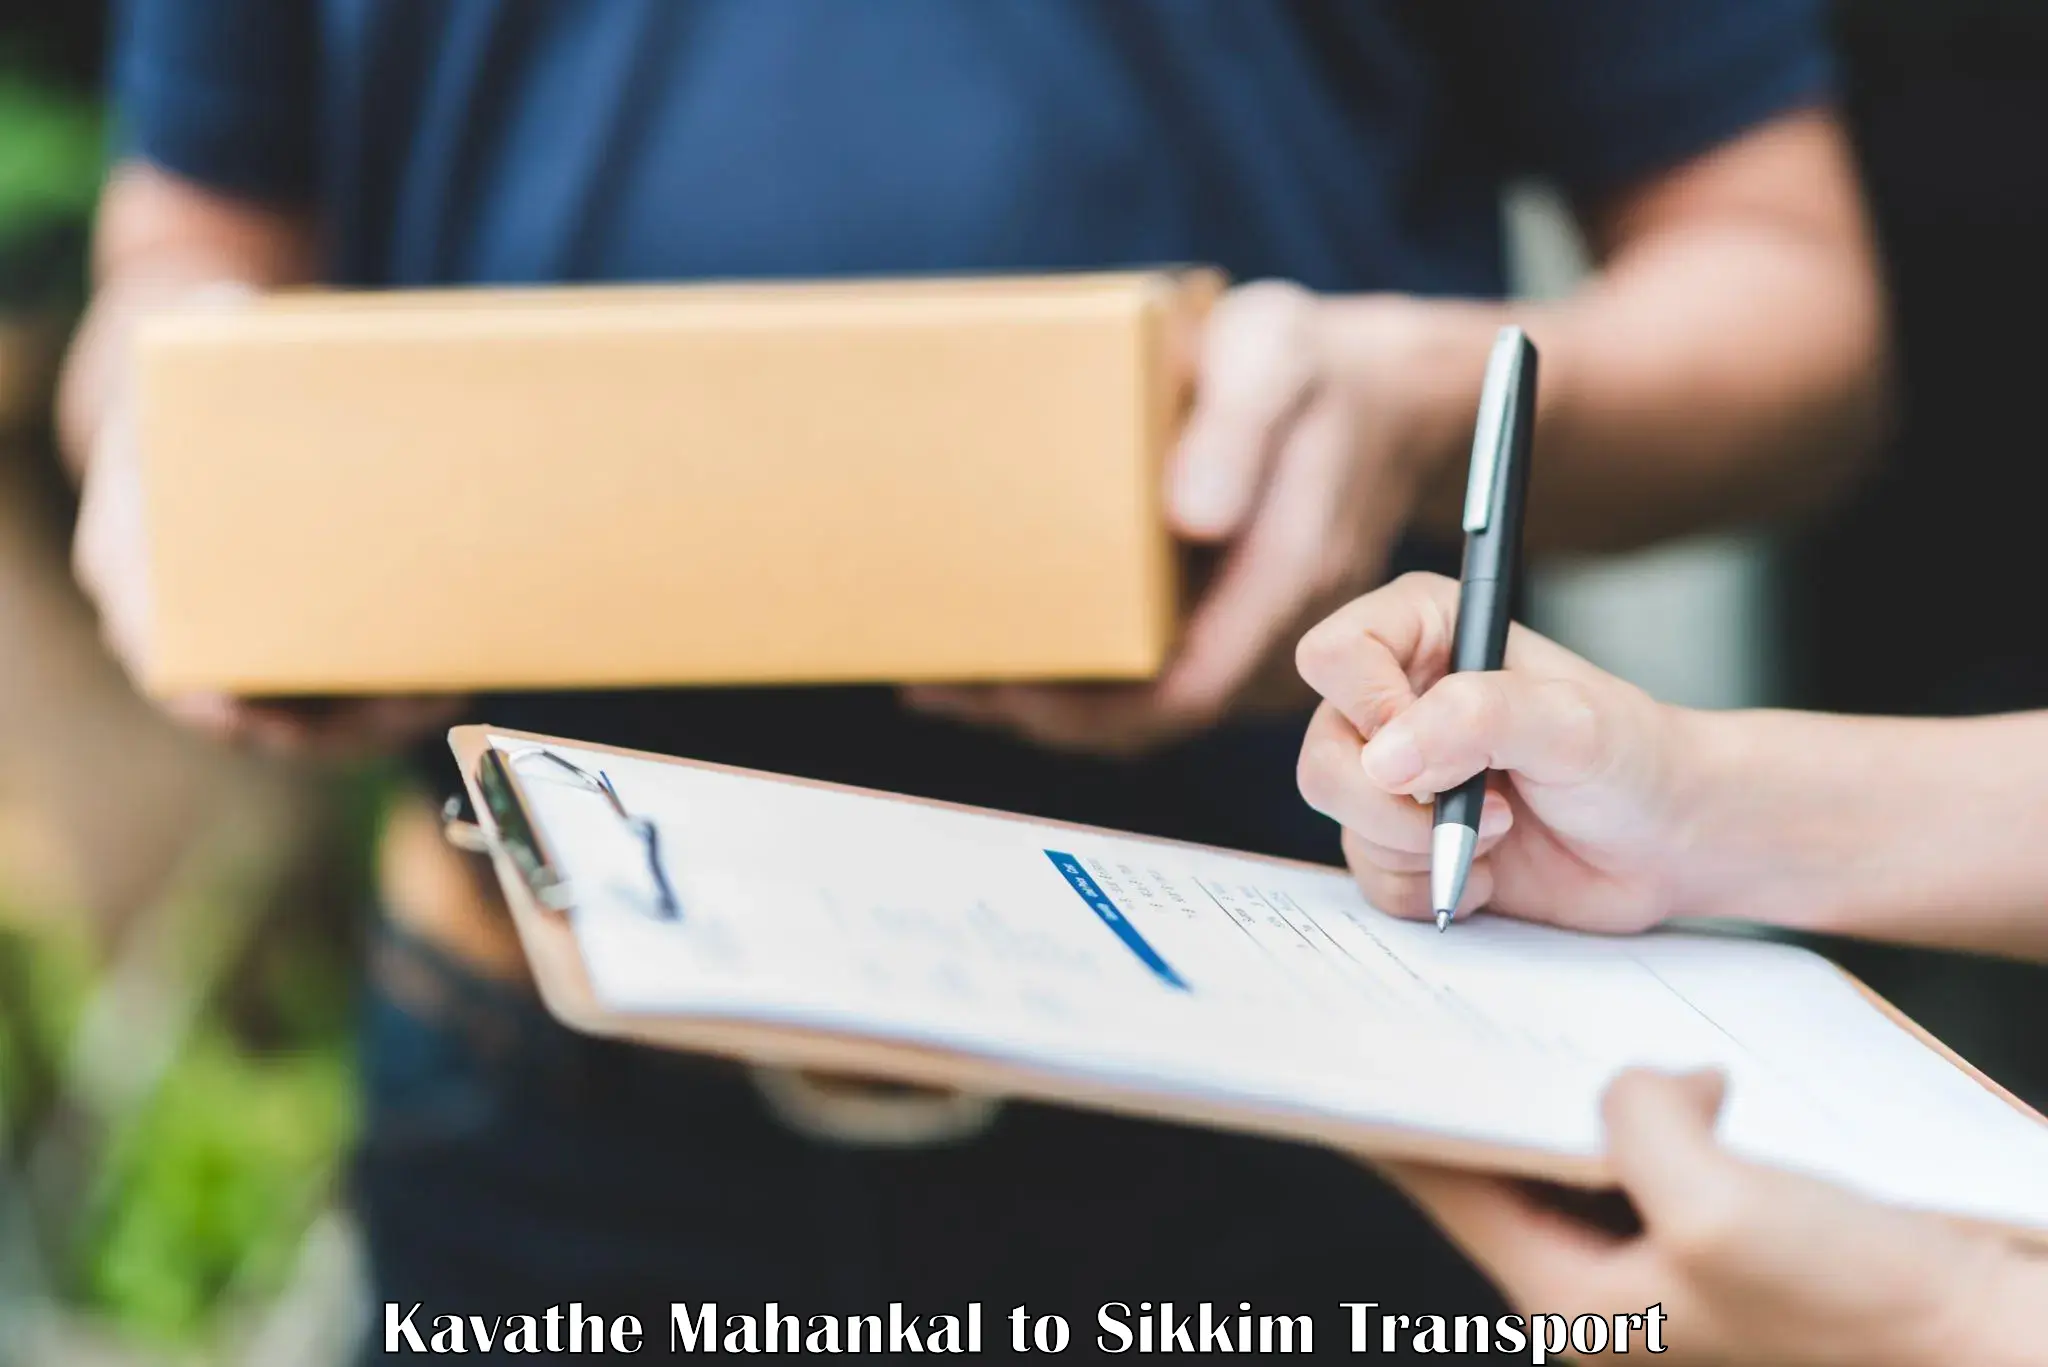 Nationwide transport services Kavathe Mahankal to East Sikkim